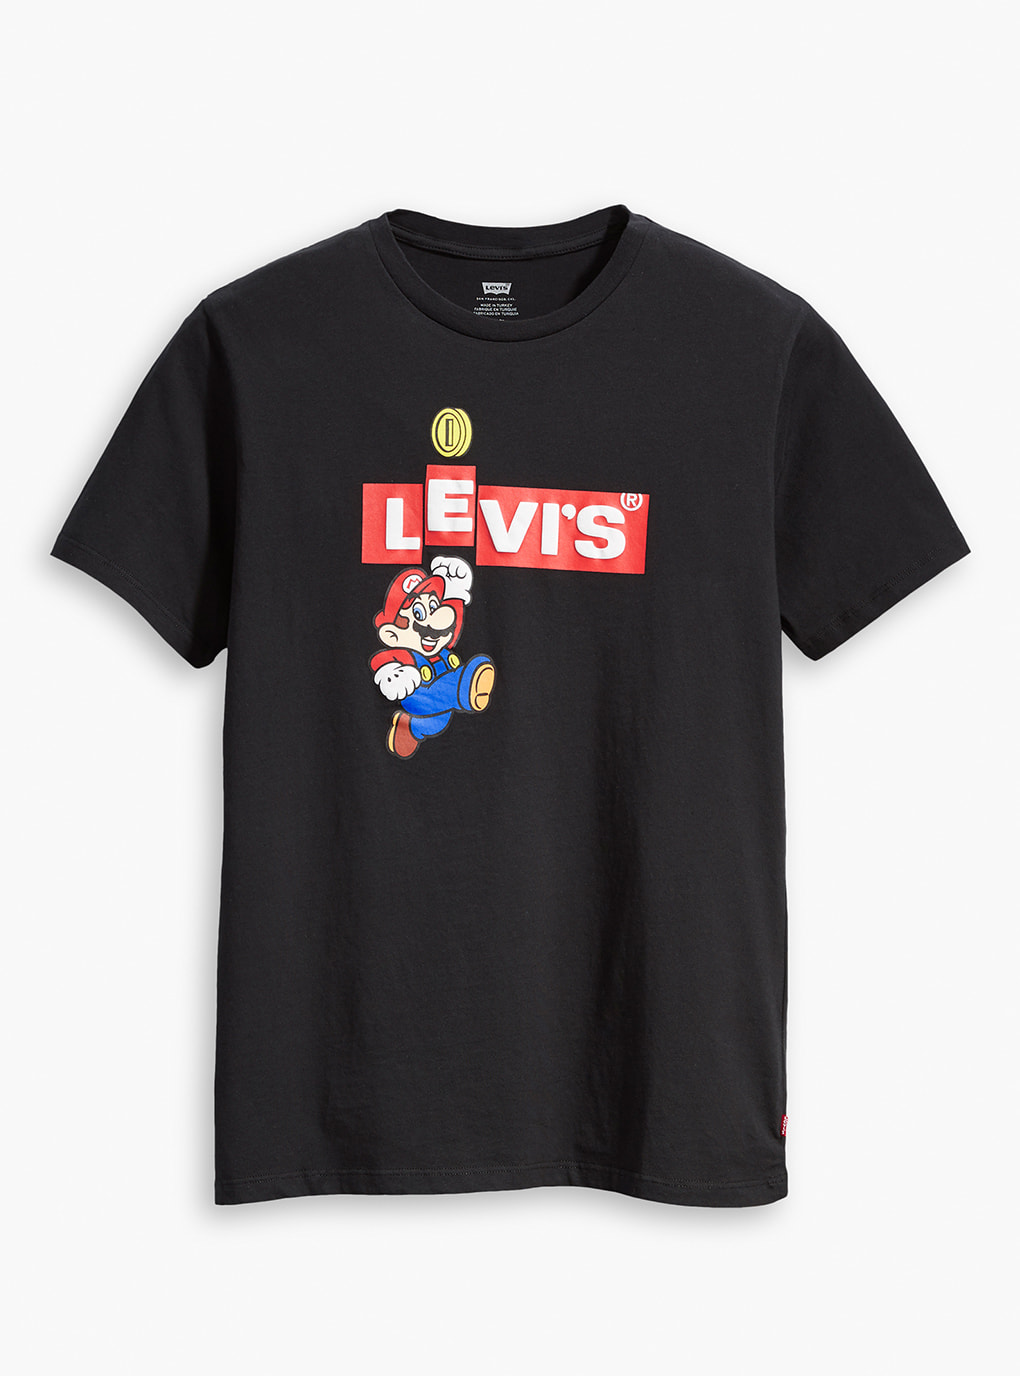 Levi's x SUPER MARIO collection now available in Japan - Nintendo Wire